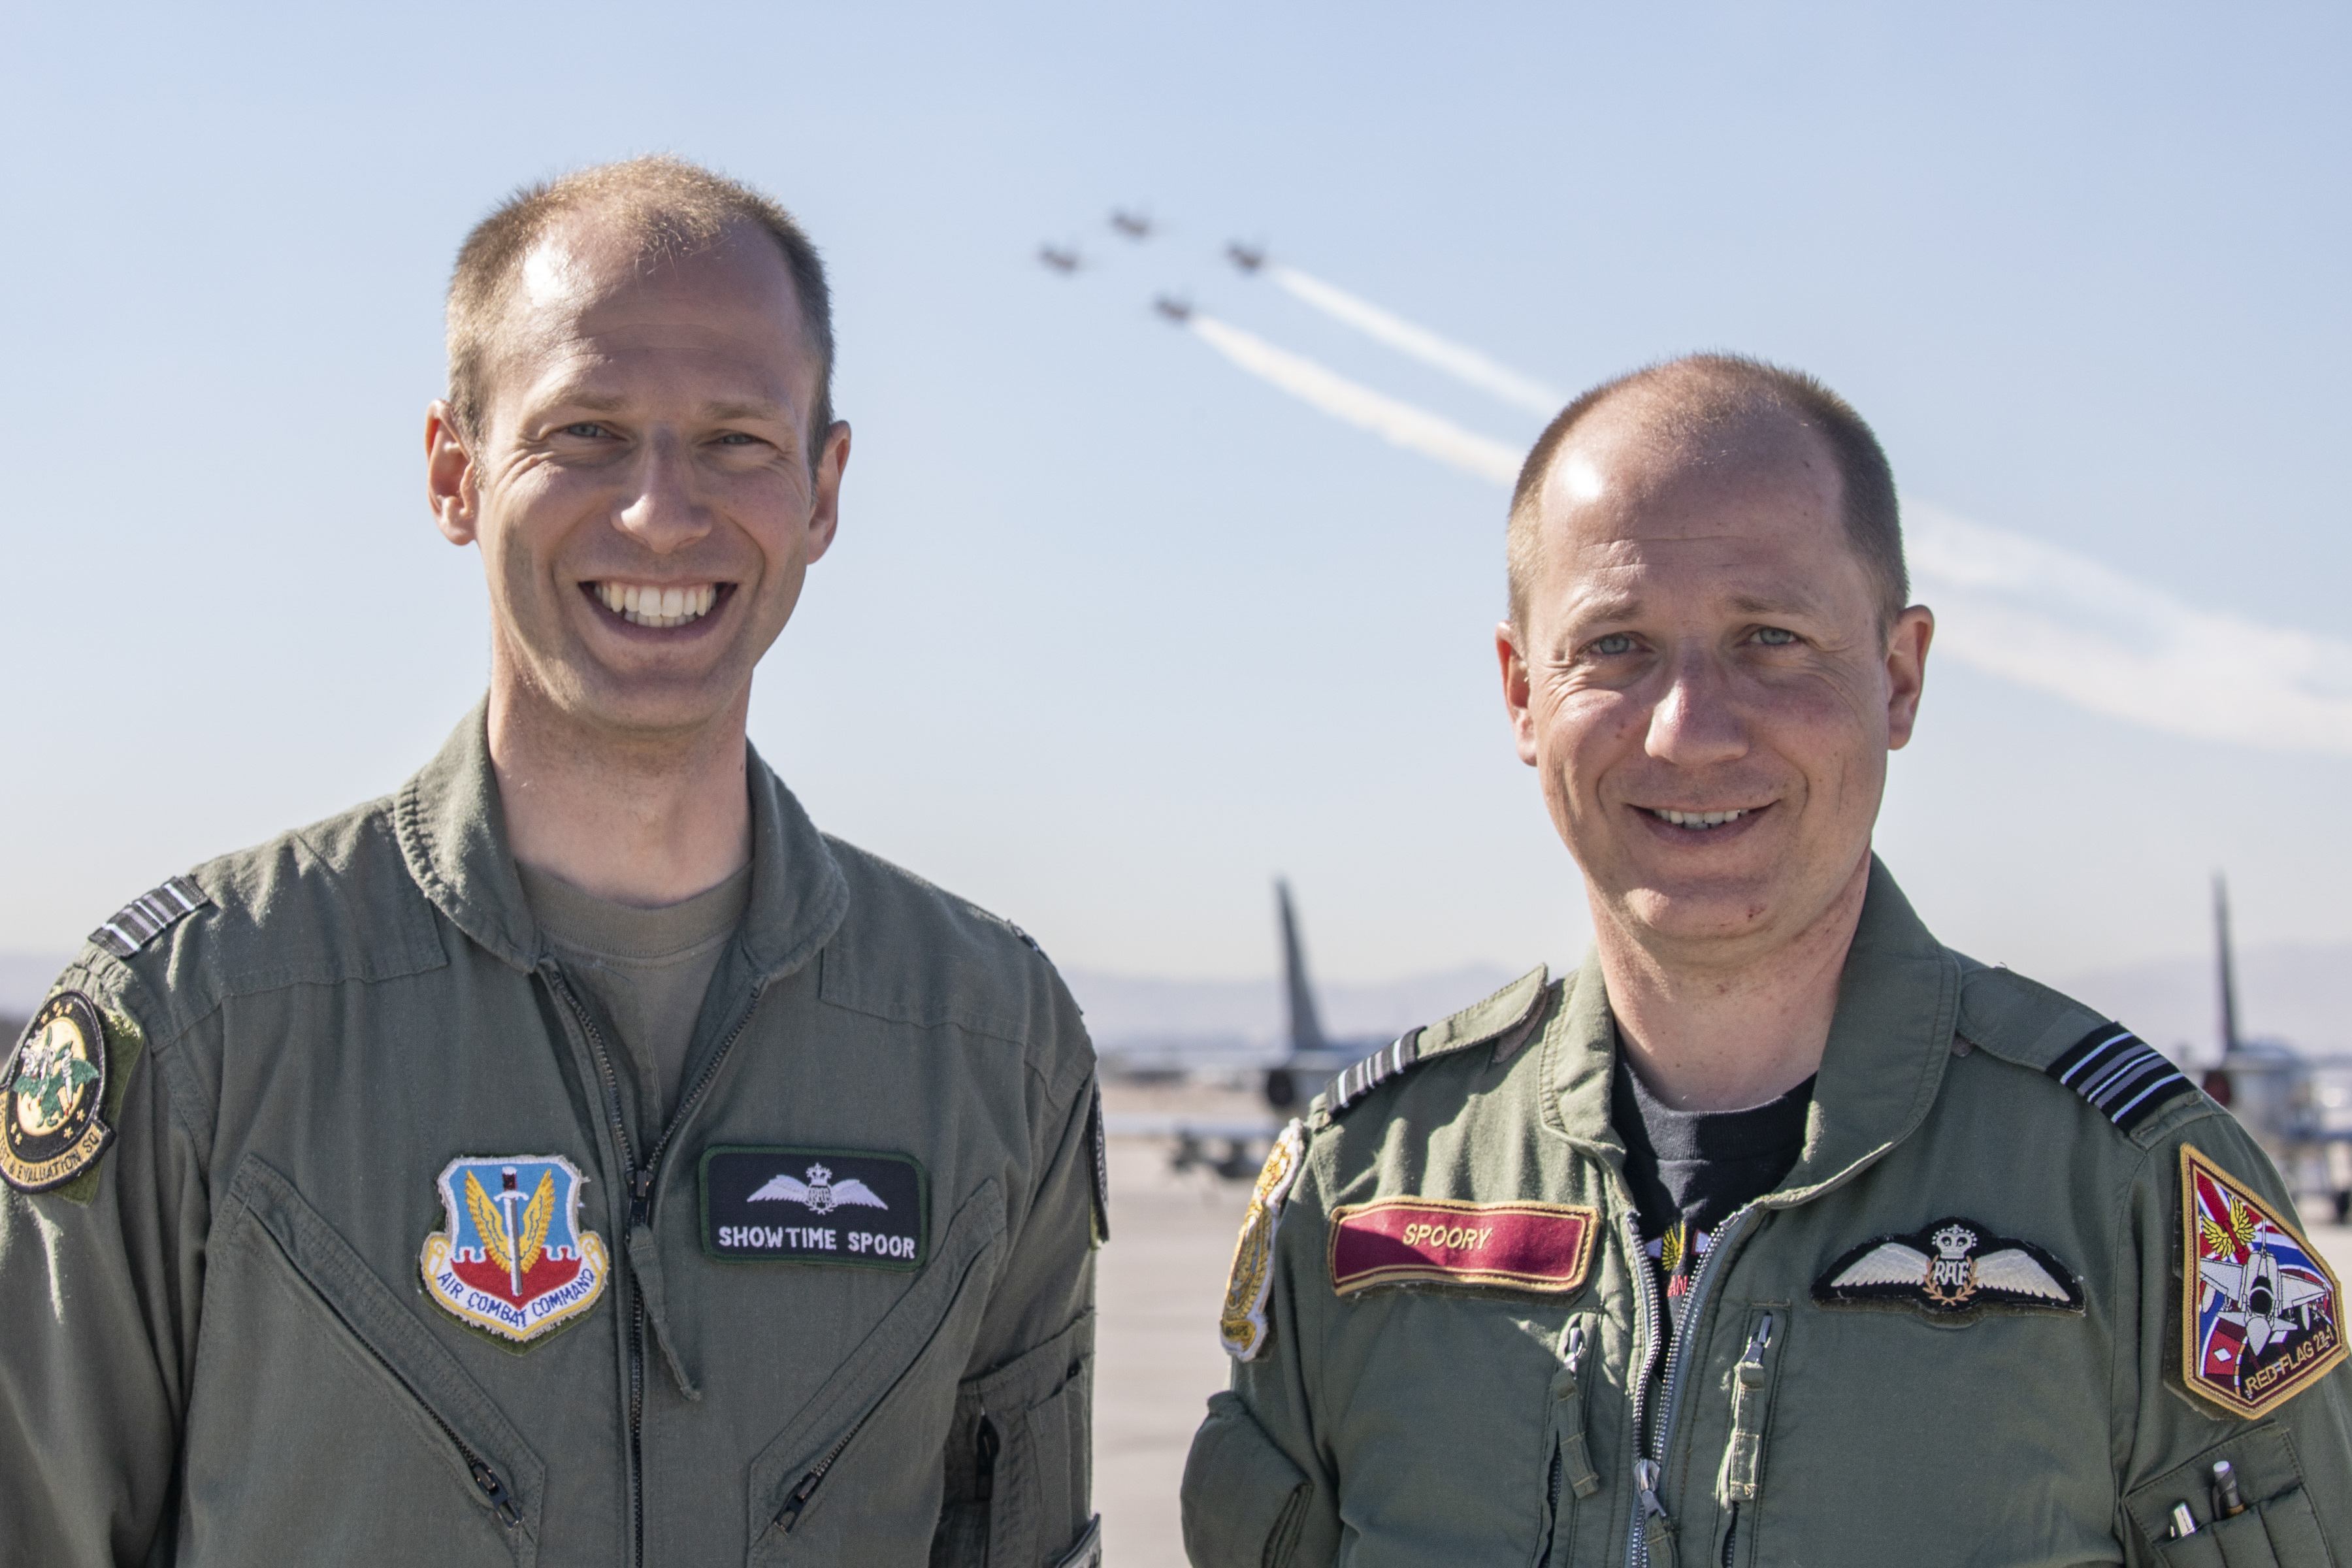 Two RAF Pilots, with Typhoon's flying past behind them.